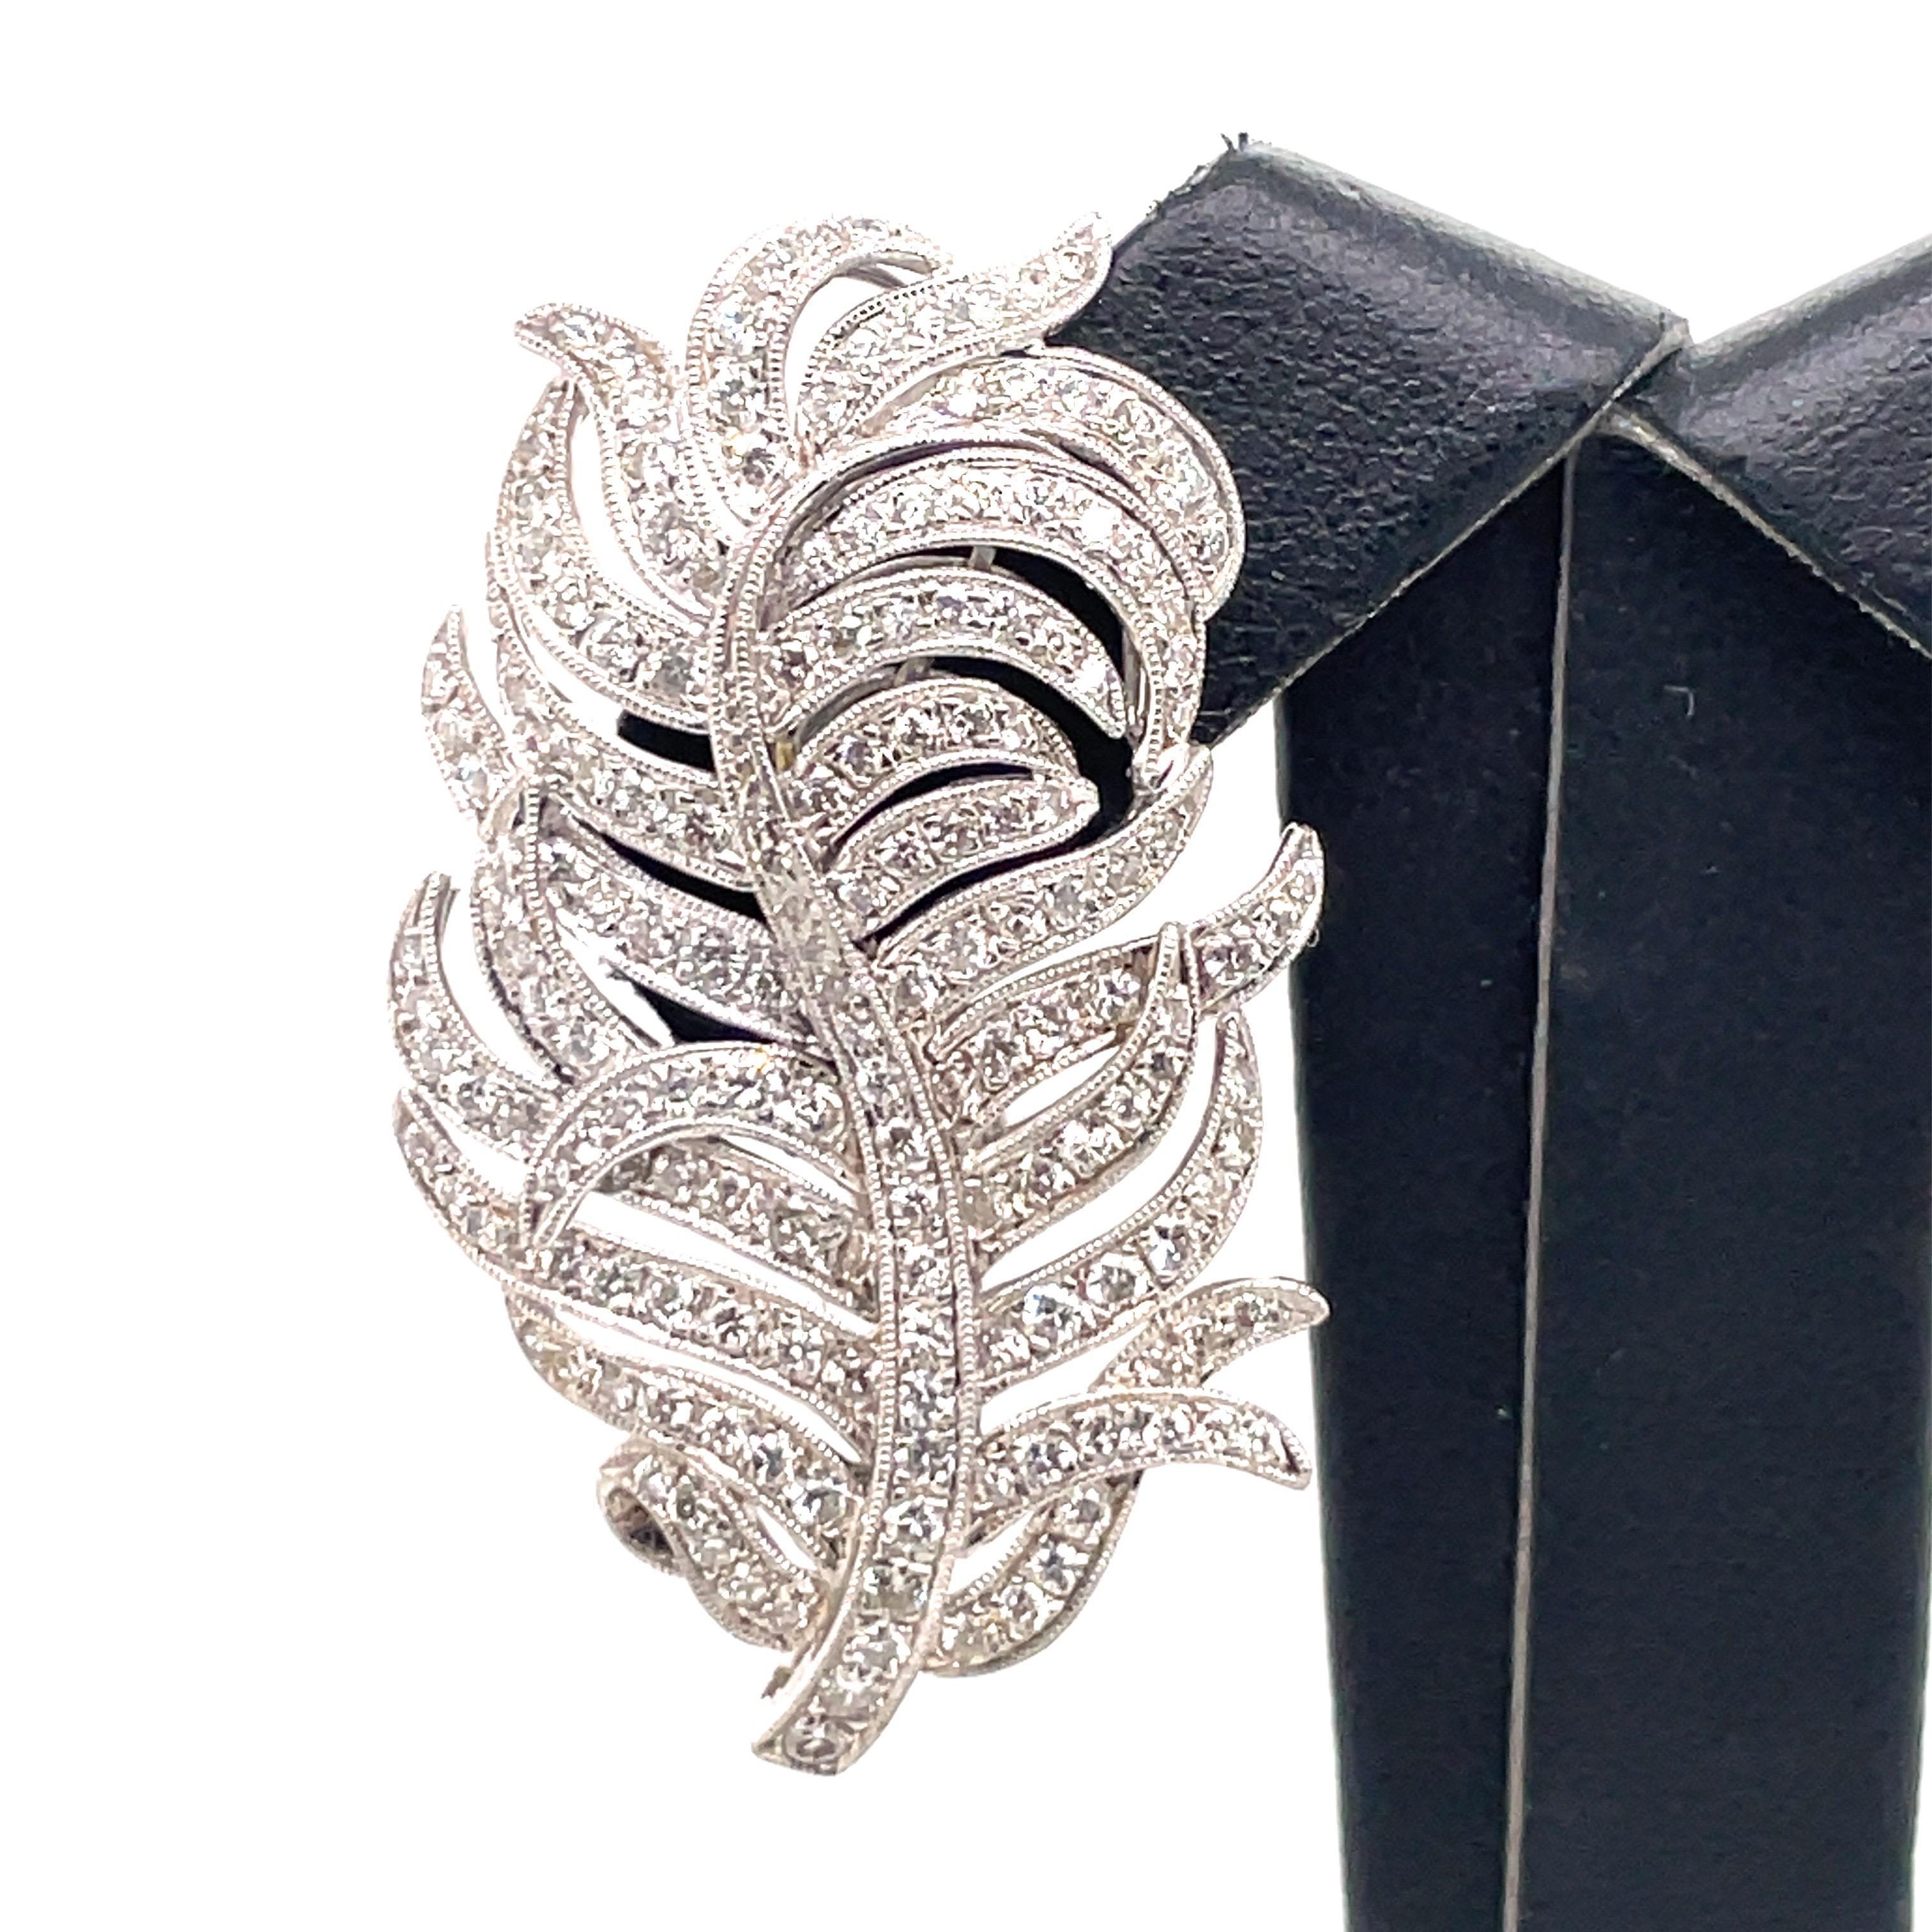 18K White gold floral leaf earrings featuring numerous round brilliants weighing 4 carats. 
Color G-H
Clarity SI